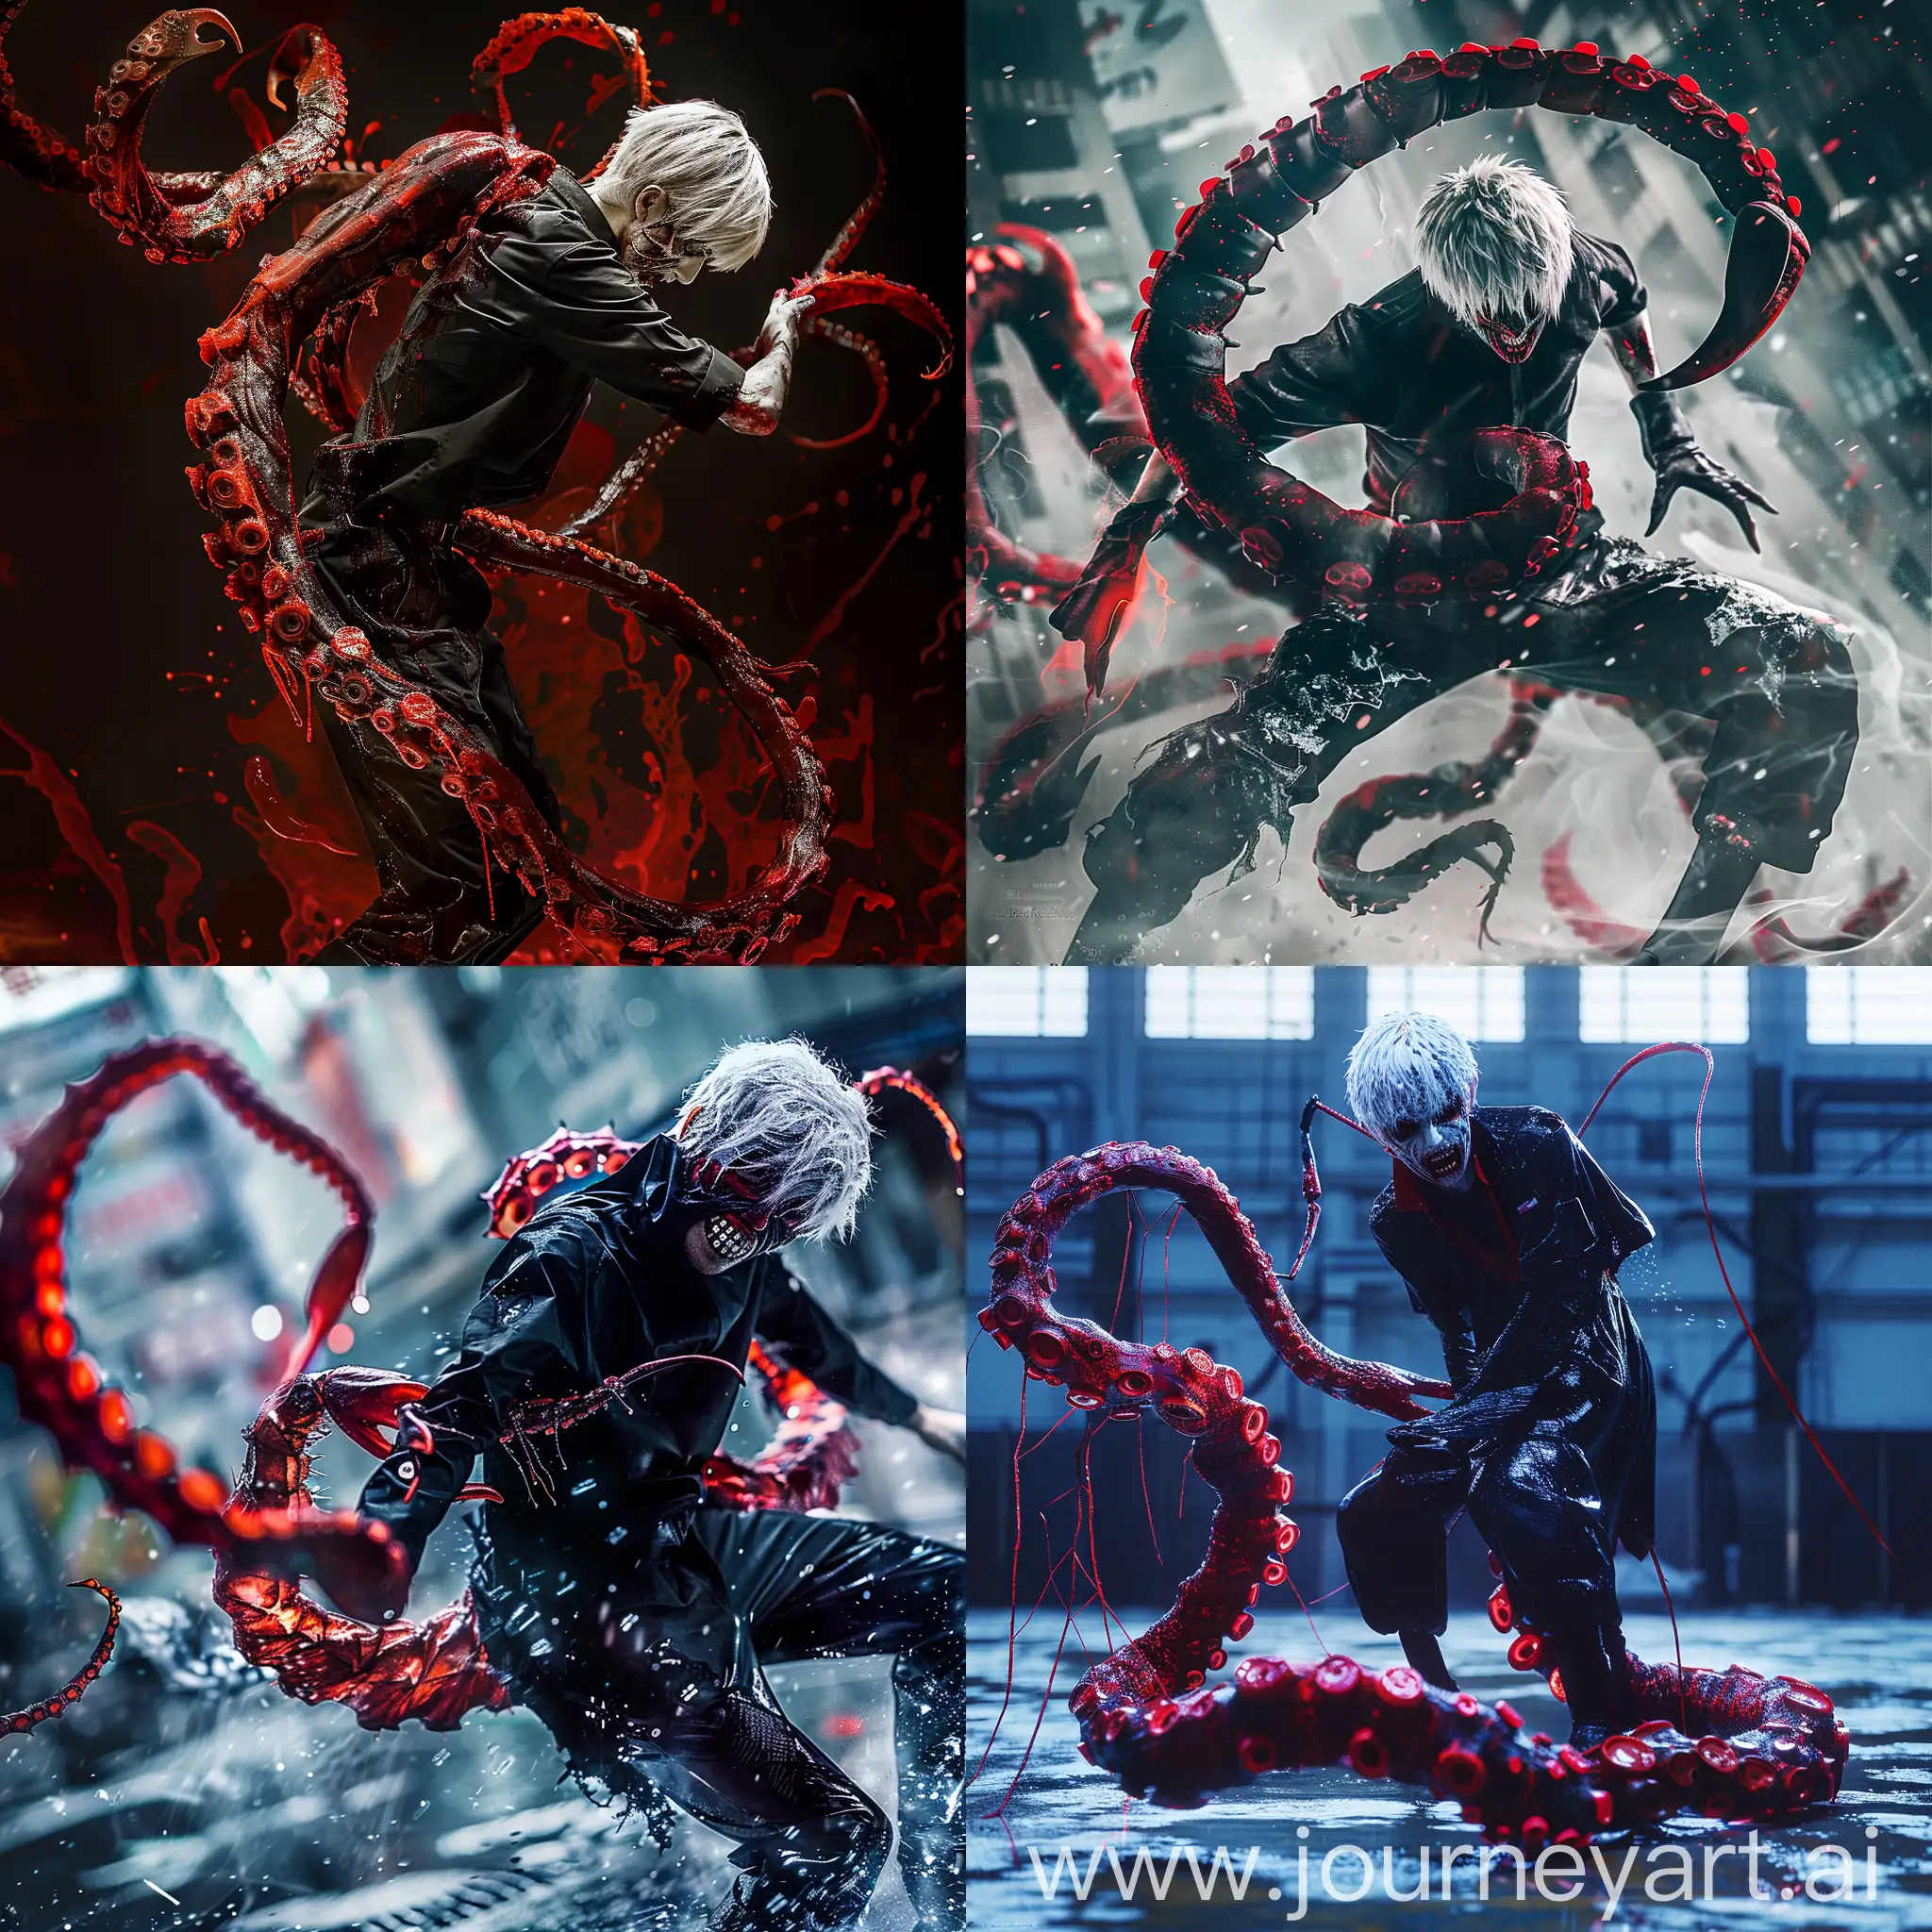 Kaneki ken,tokyo ghoul, scorpion tentacle, psychotic, action , weird-core, expressive, unique, high - quality, Canon EOS 5D Mark IV DSLR, f/5. 6 aperture, 1/125 second shutter speed, ISO 100, Adobe Photoshop, award - winning, glibatree style, experimental techniques, unusual perspectives, attention to detail 